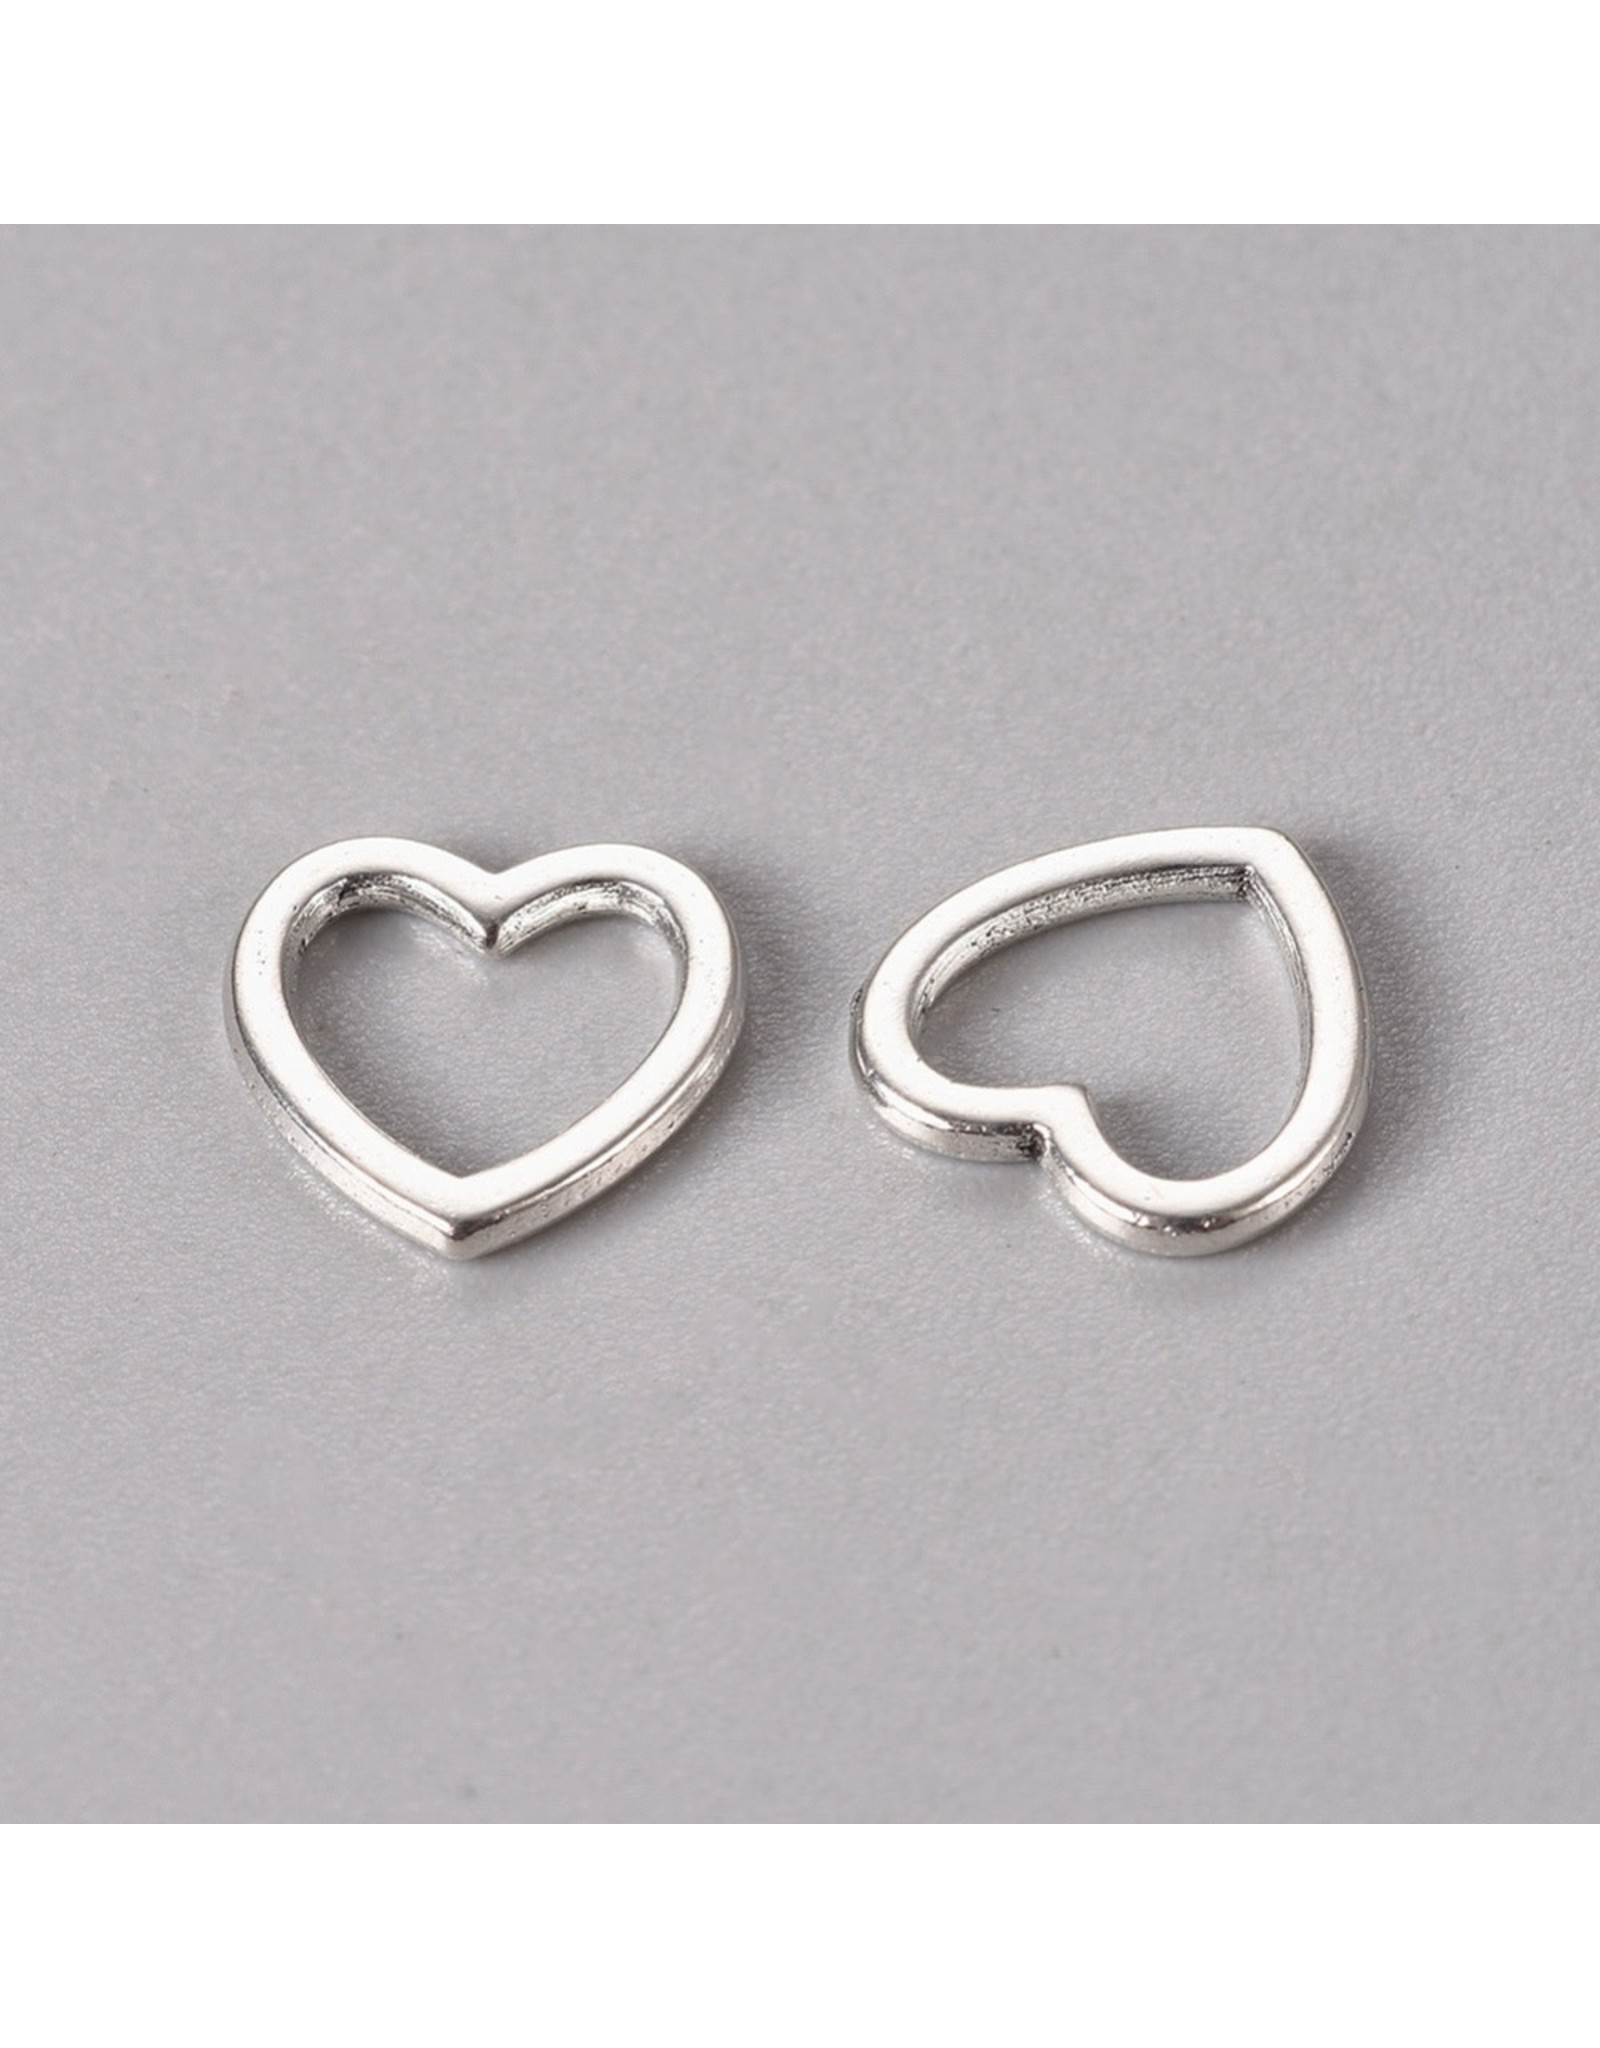 Heart Link  10mm  Antique Silver  x10  NF